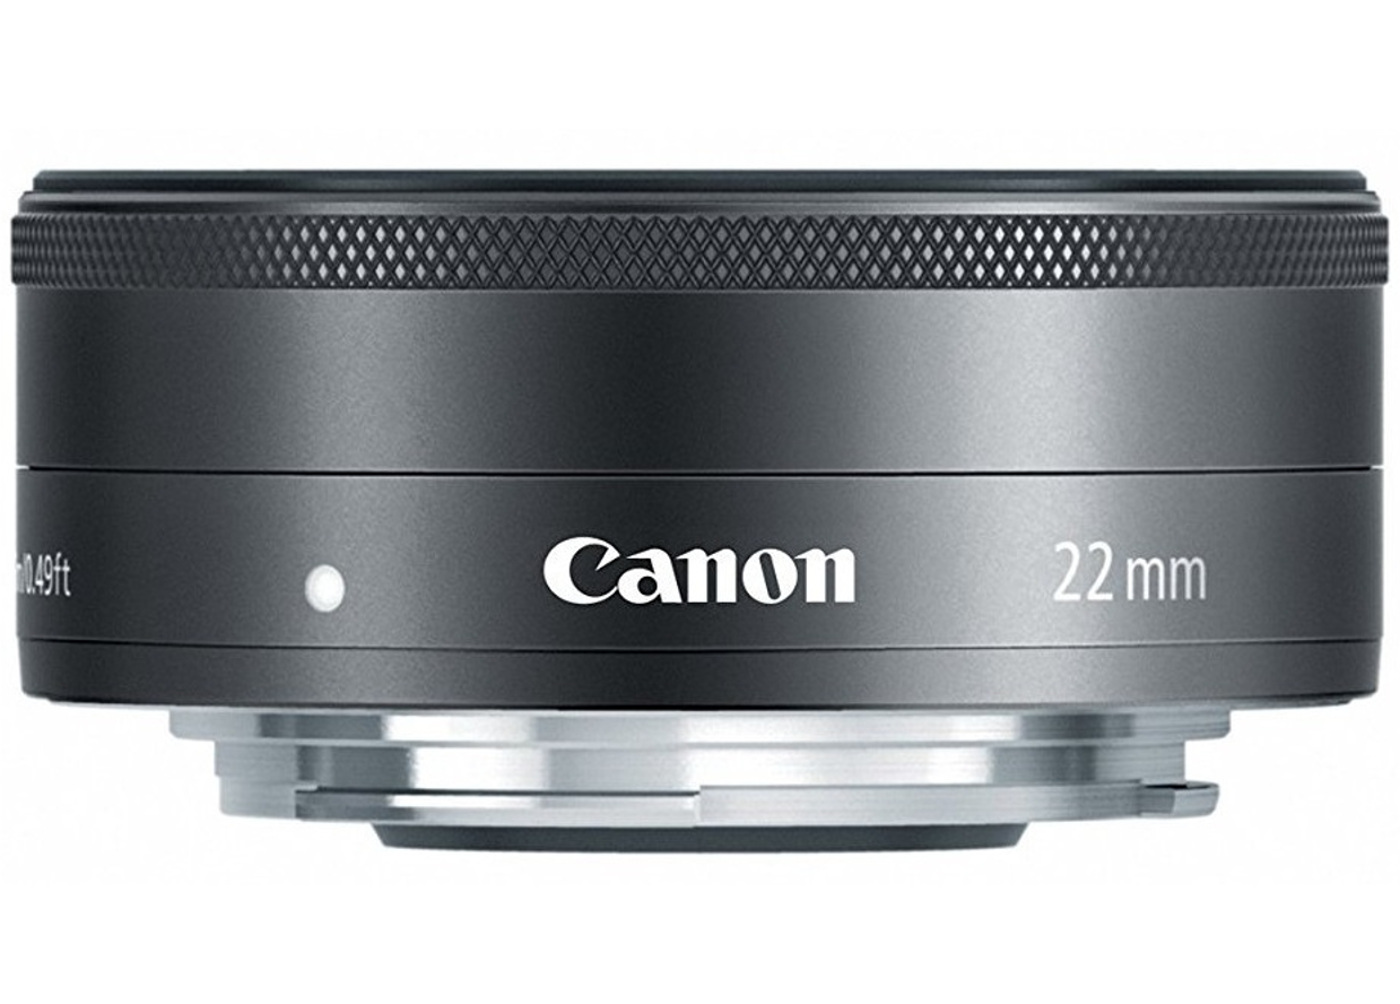 Canon New Canon EF-M 22mm f/2.0 STM Pancake Lens 5985B002 for Canon EOS M Cameras